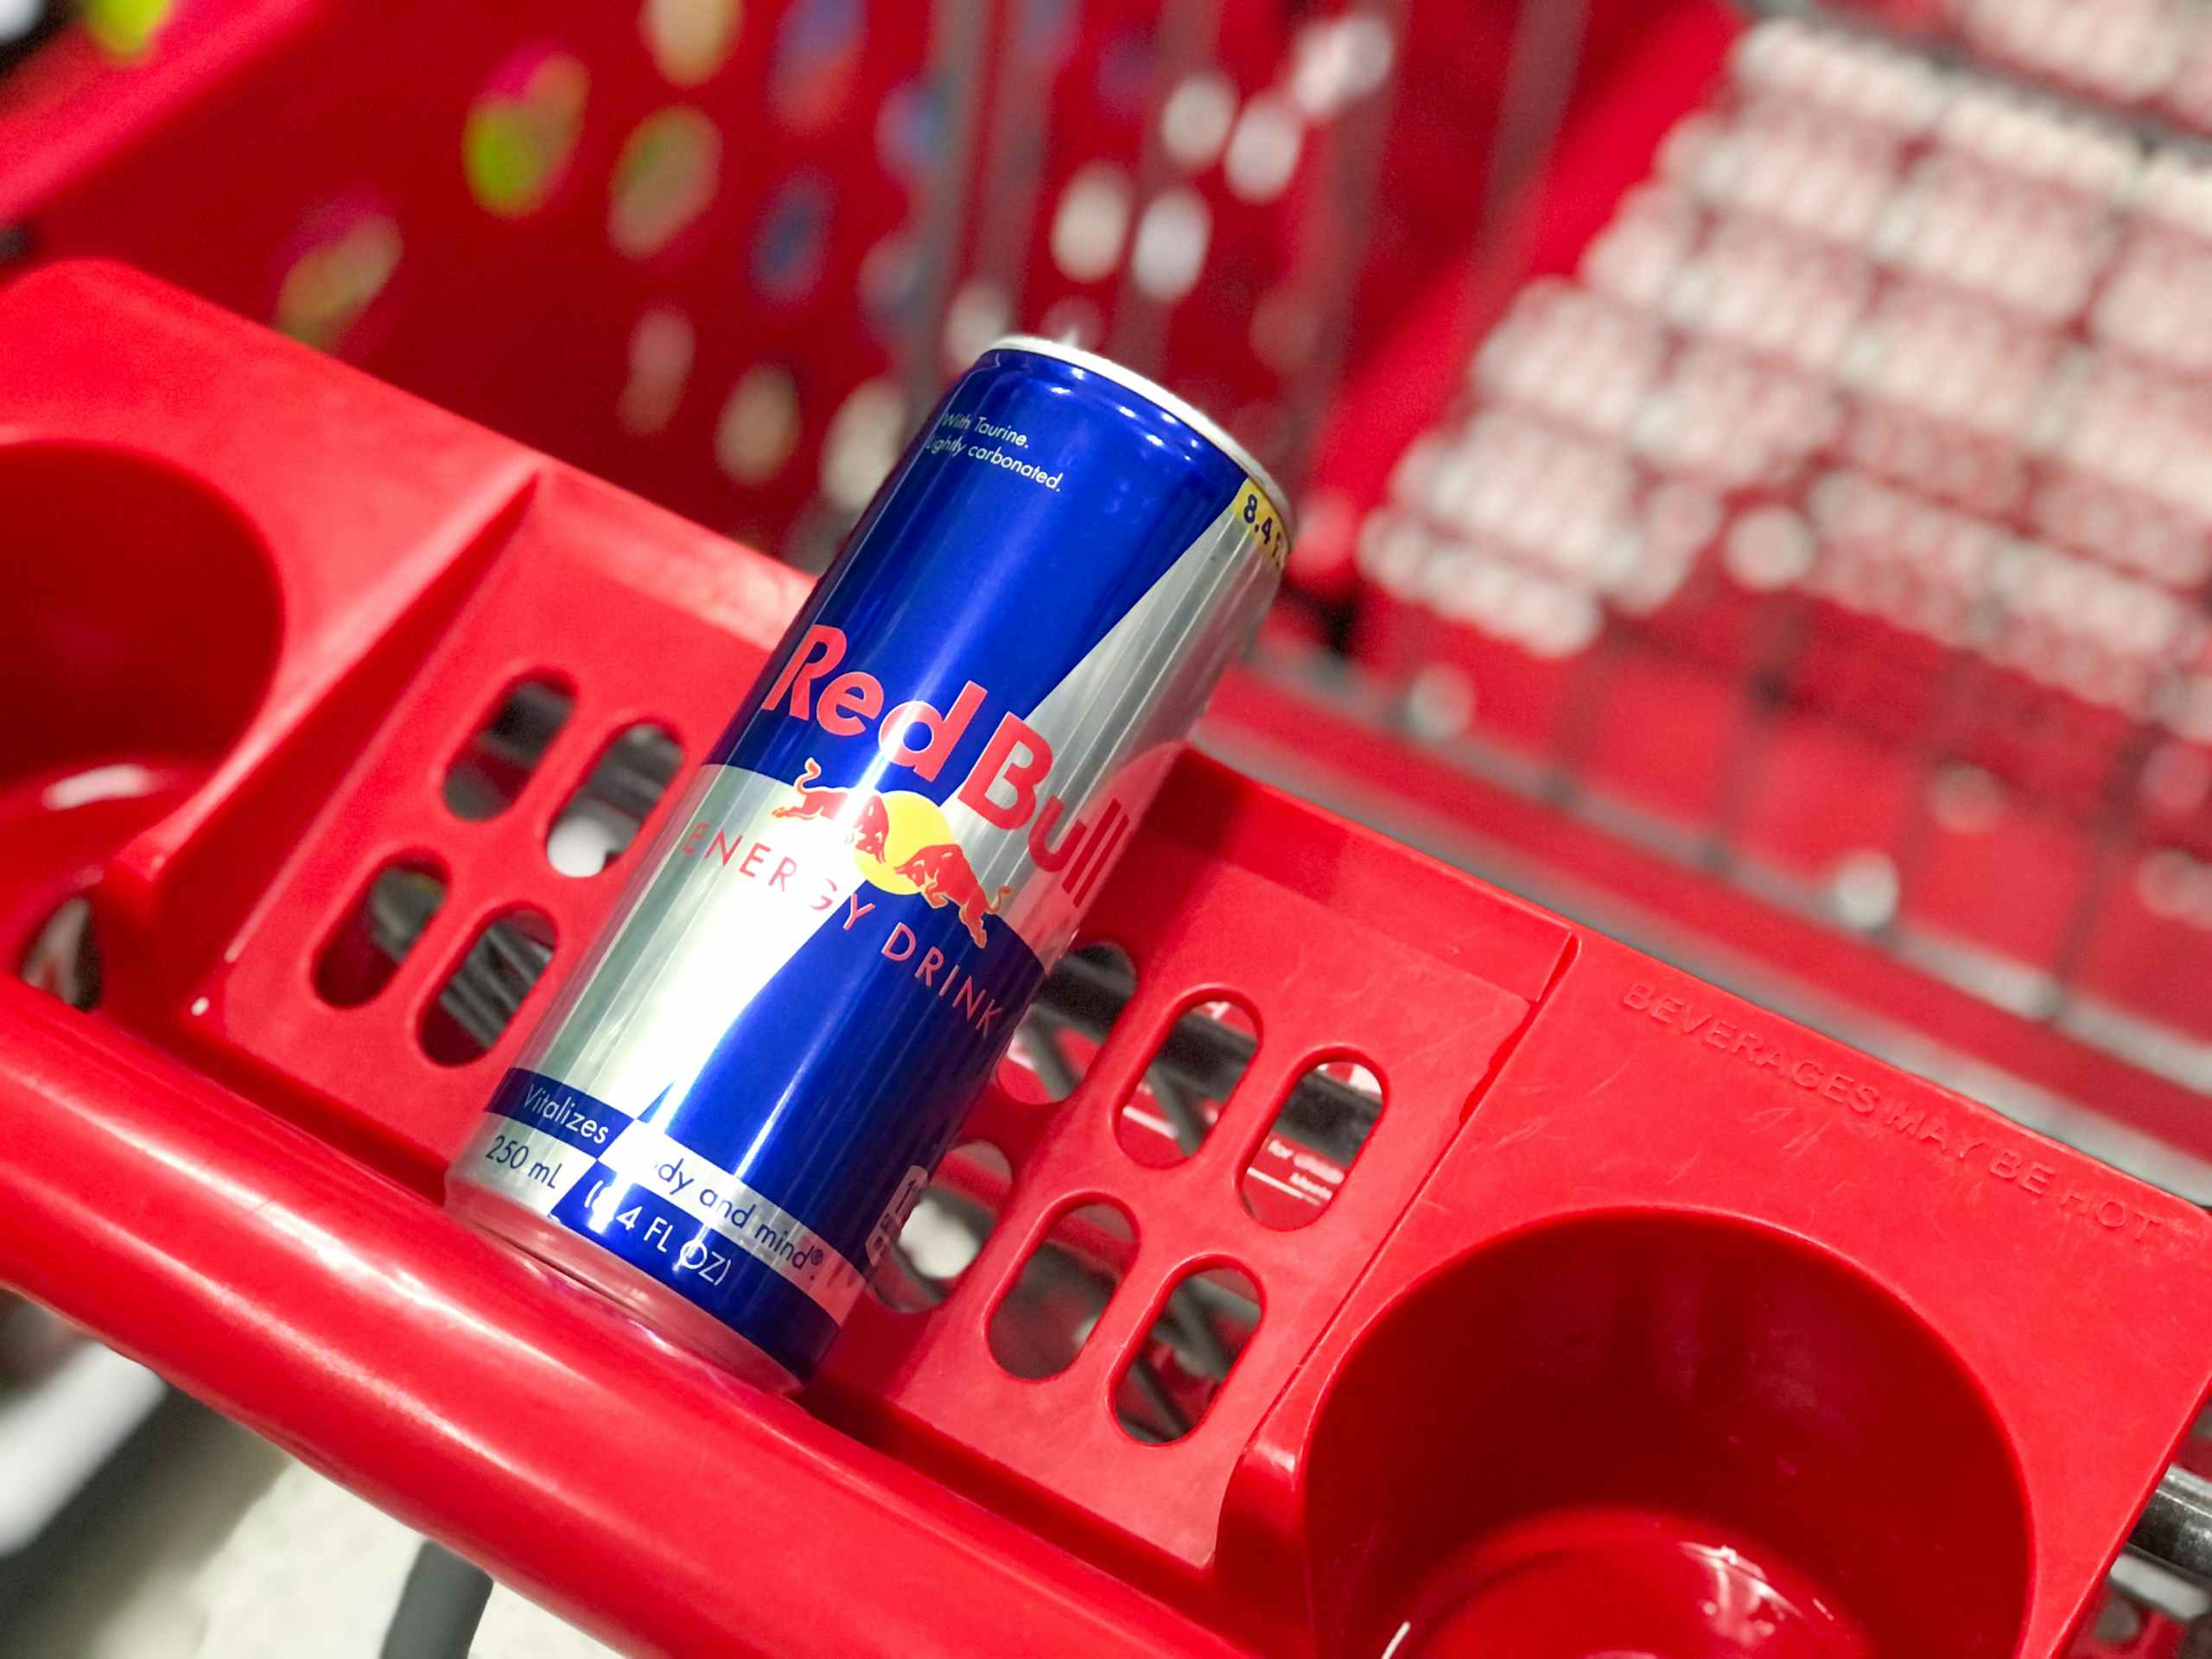 red bull can in Target shopping cart